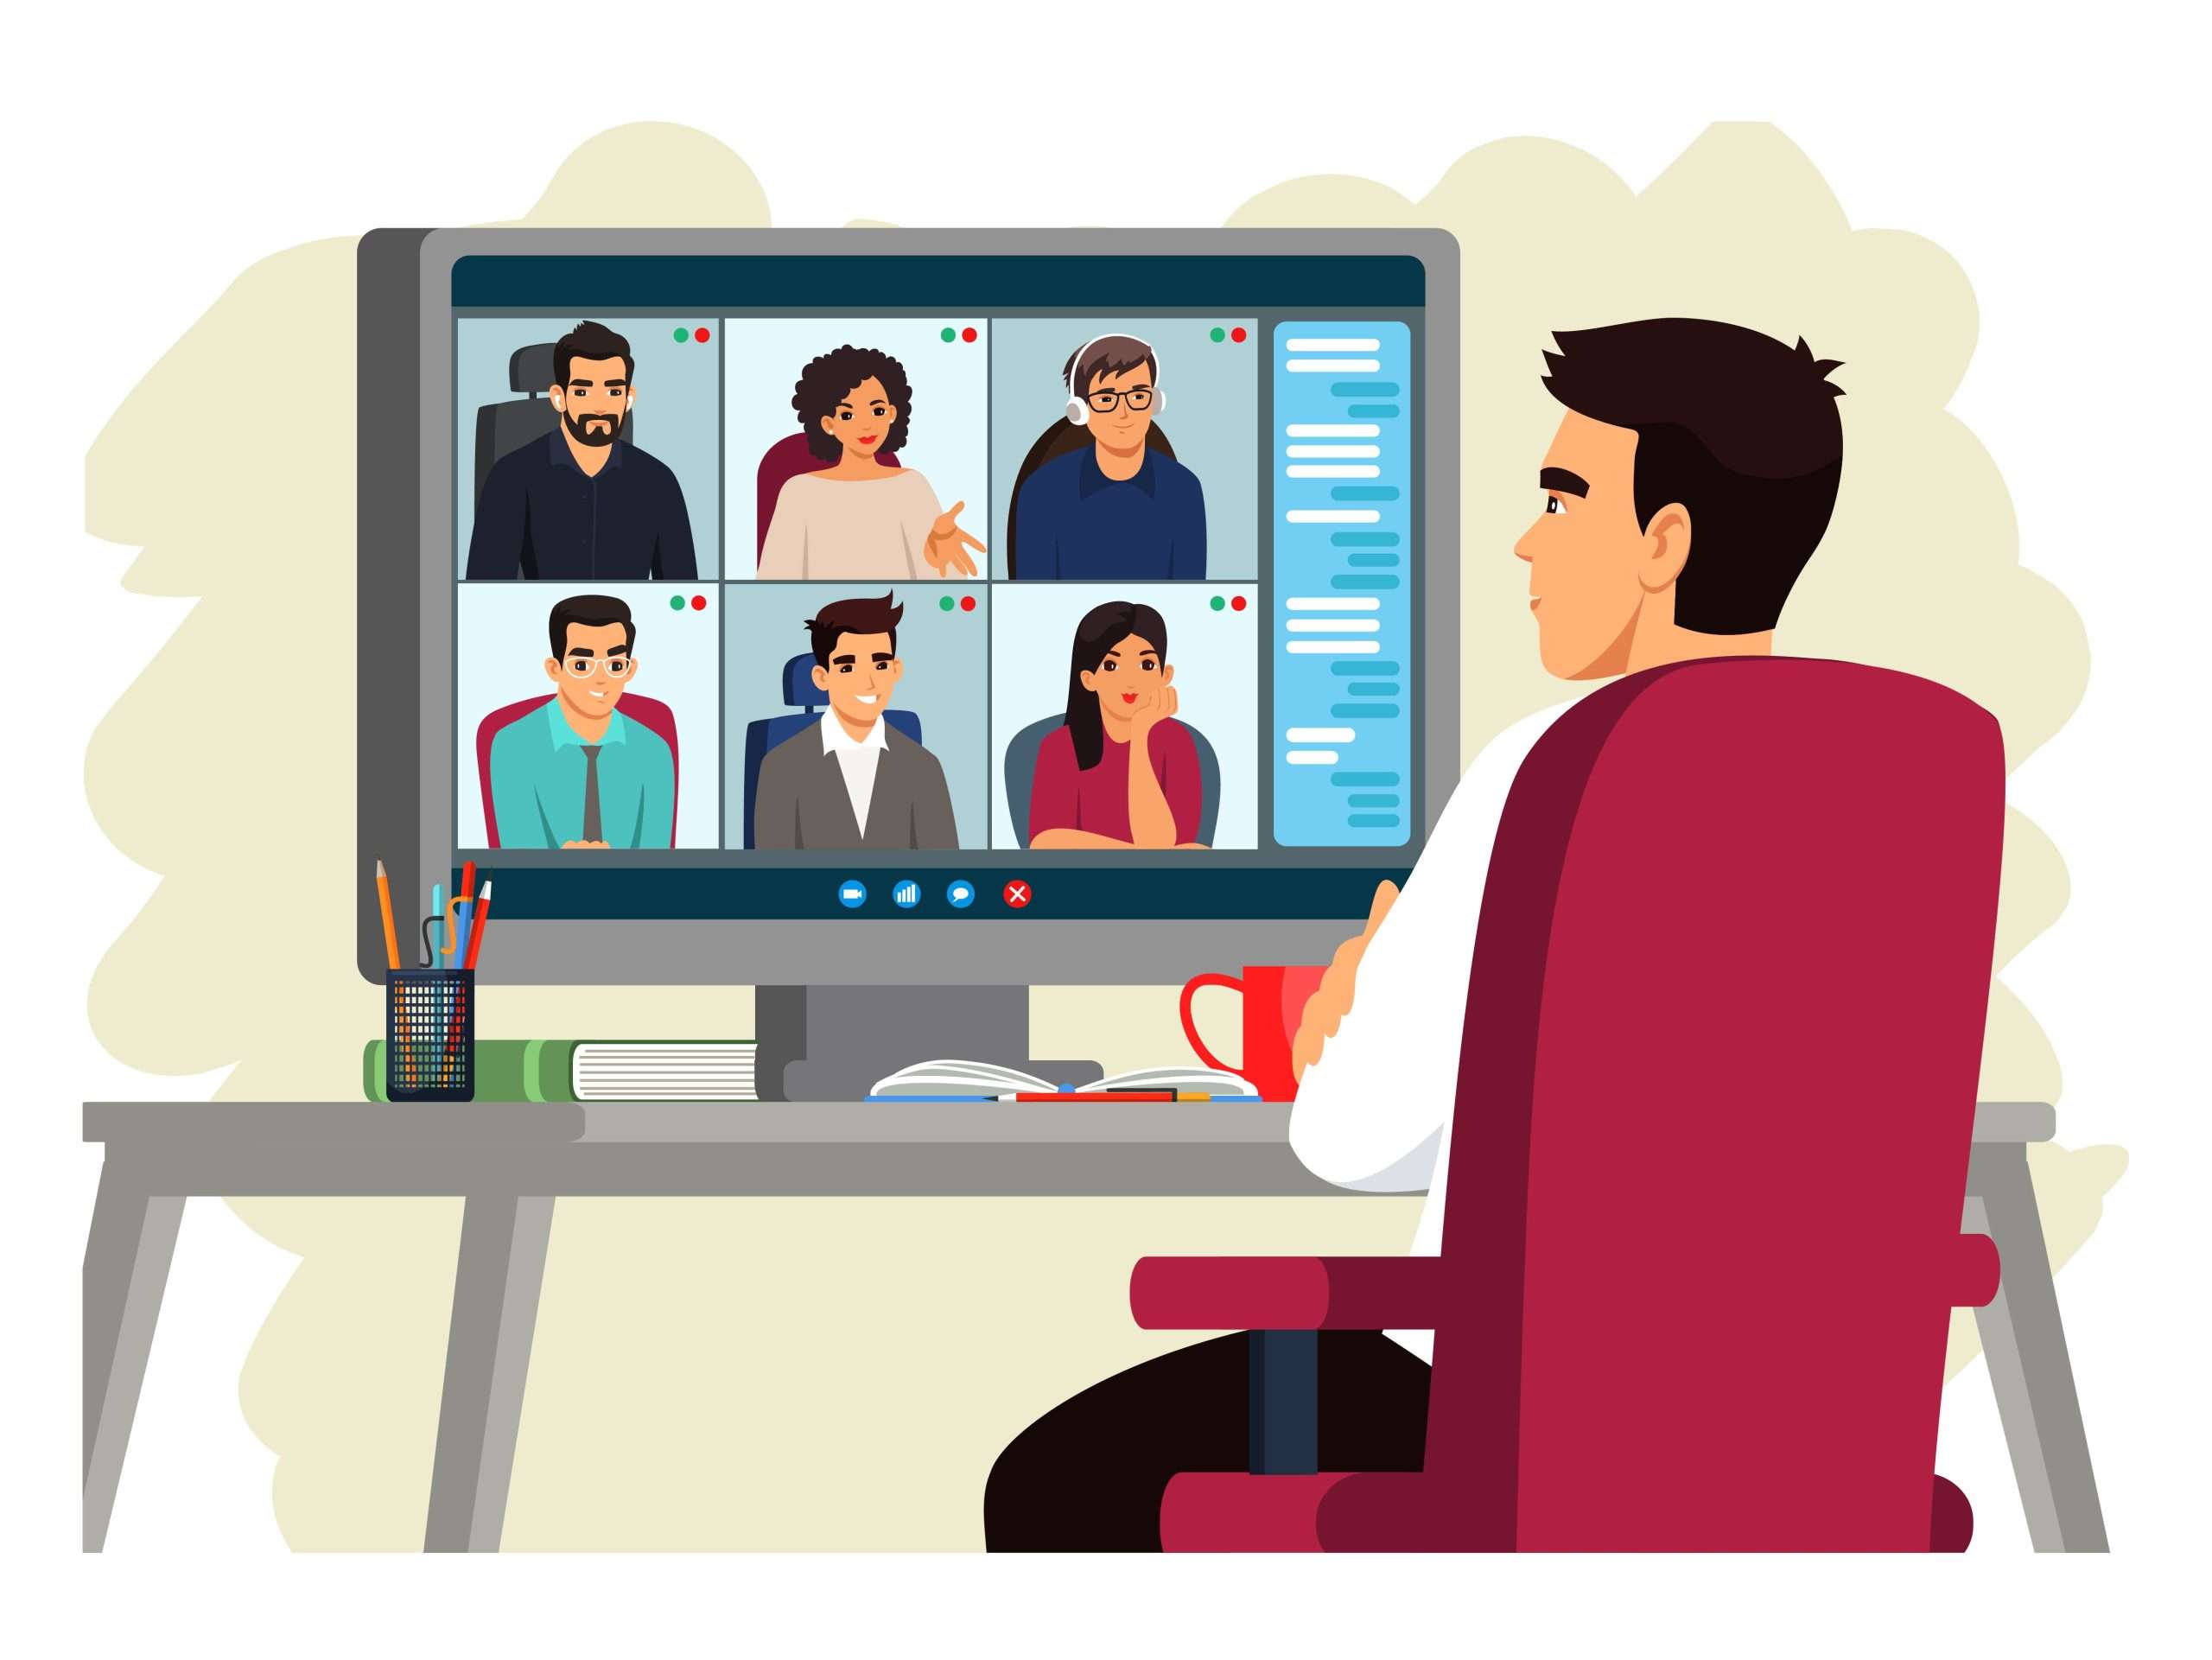 A vibrant image of remote teams engaged in a video call, representing inclusive practices in remote settings.